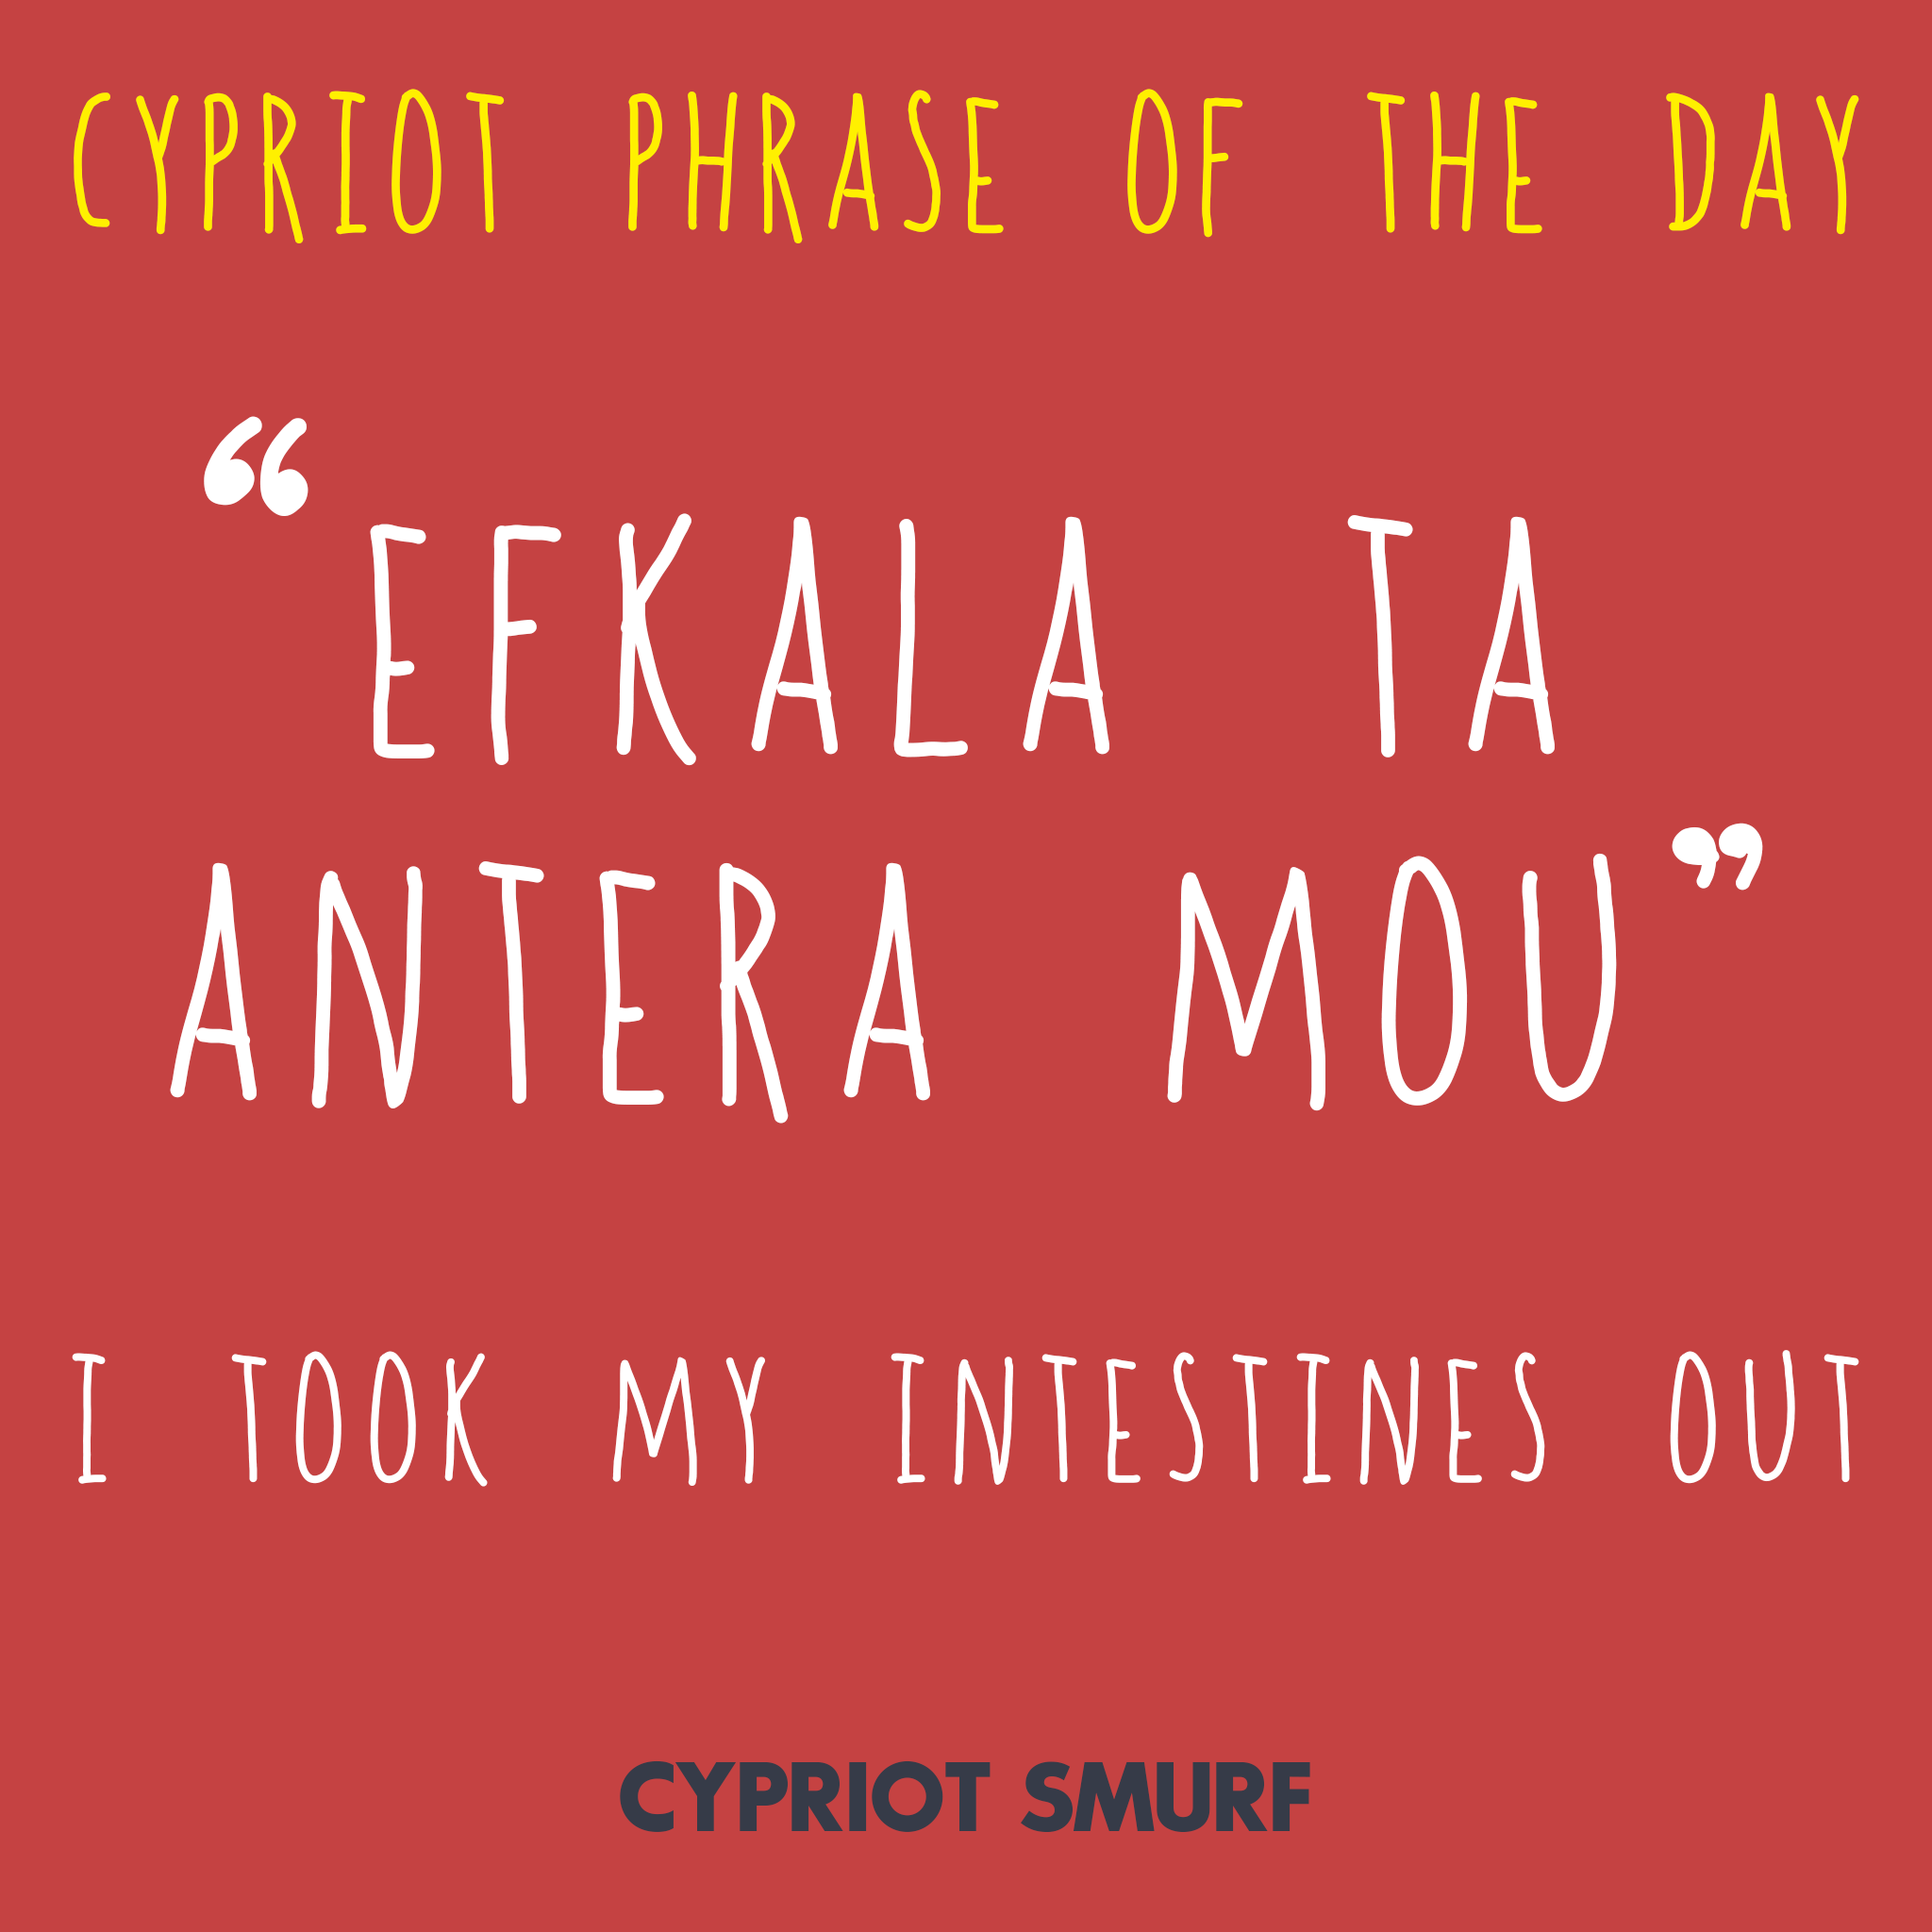 Cypriot Words, Phrases & Quotes | Cypriot Smurf